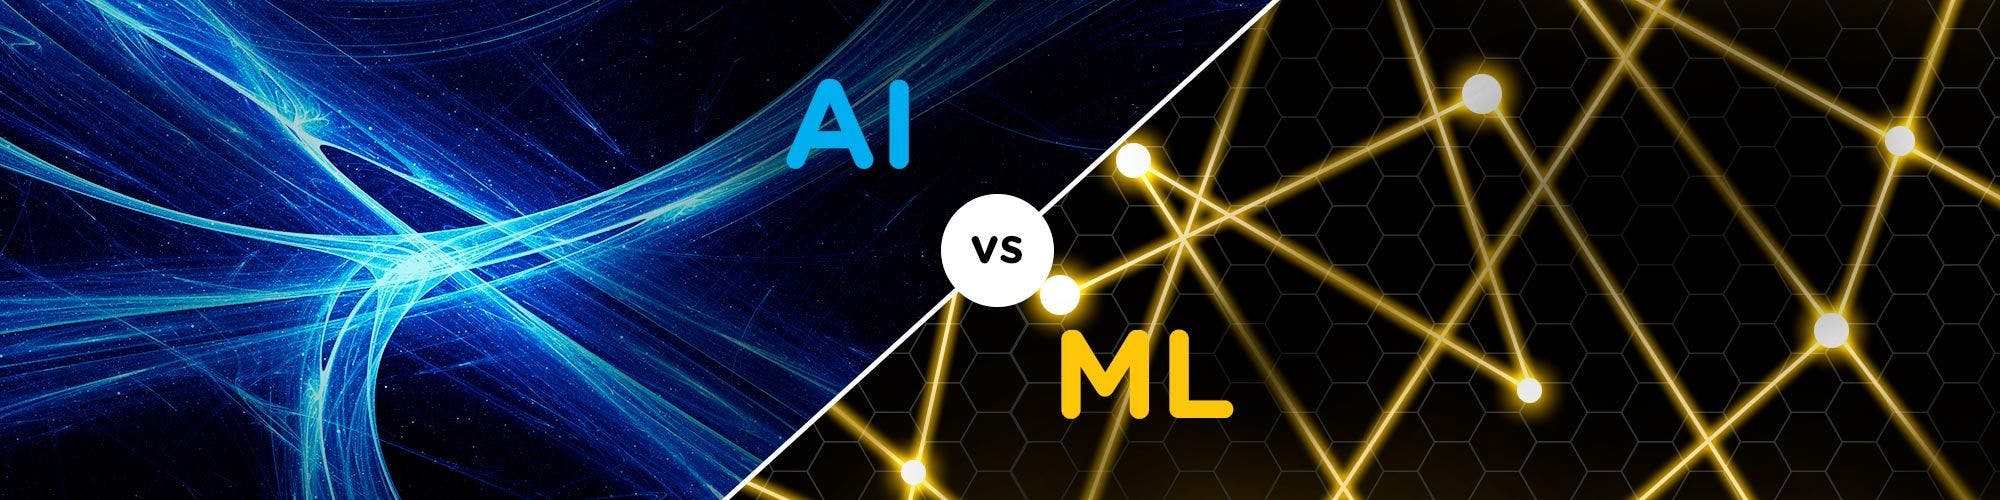 featured image - AI vs ML: What's the Difference?